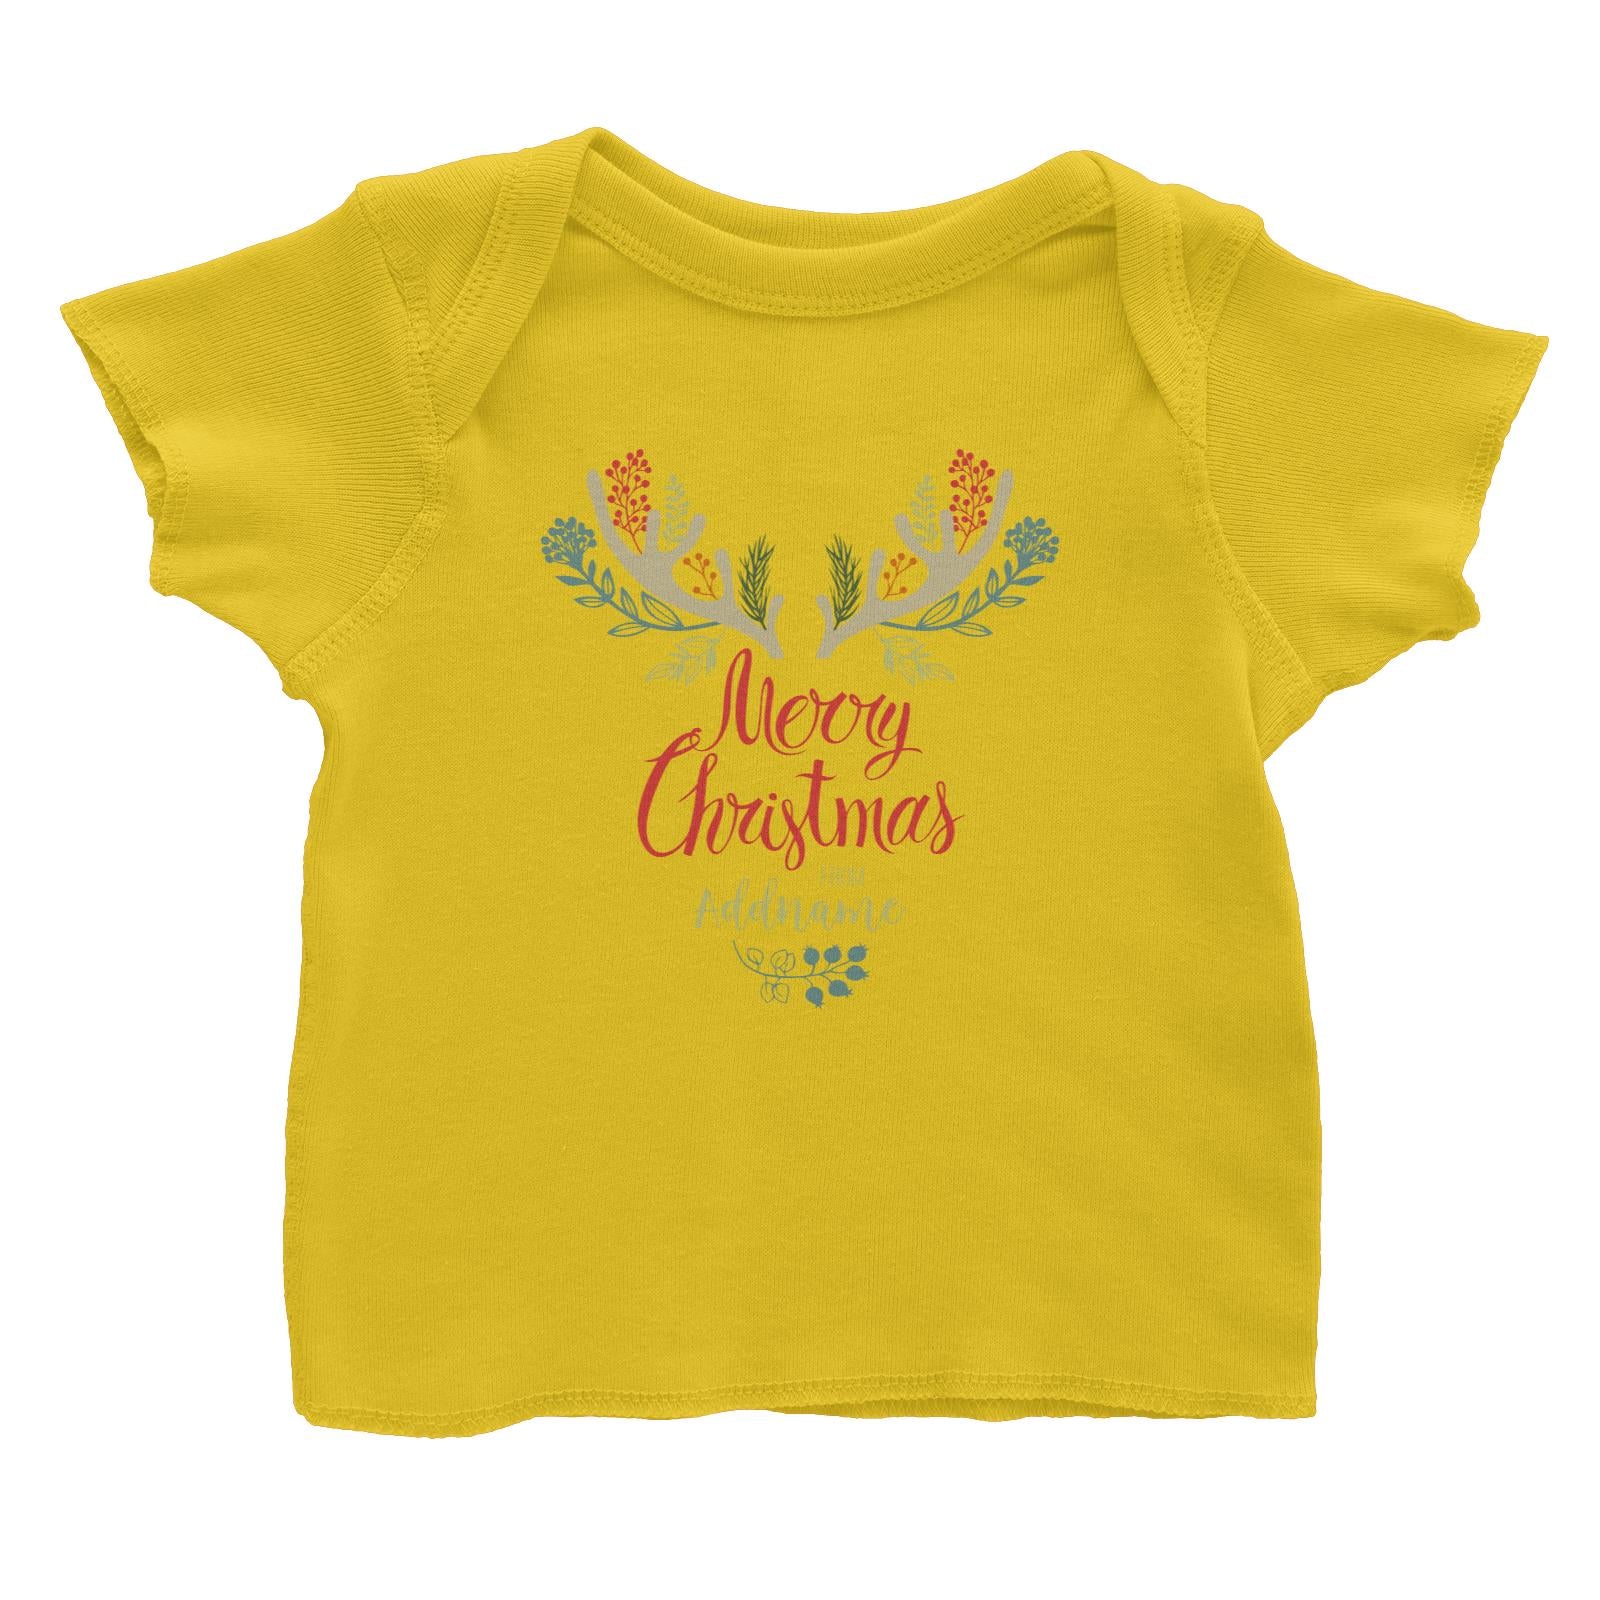 Christmas Reindeer Icon With Merry Christmas Addname Baby T-Shirt